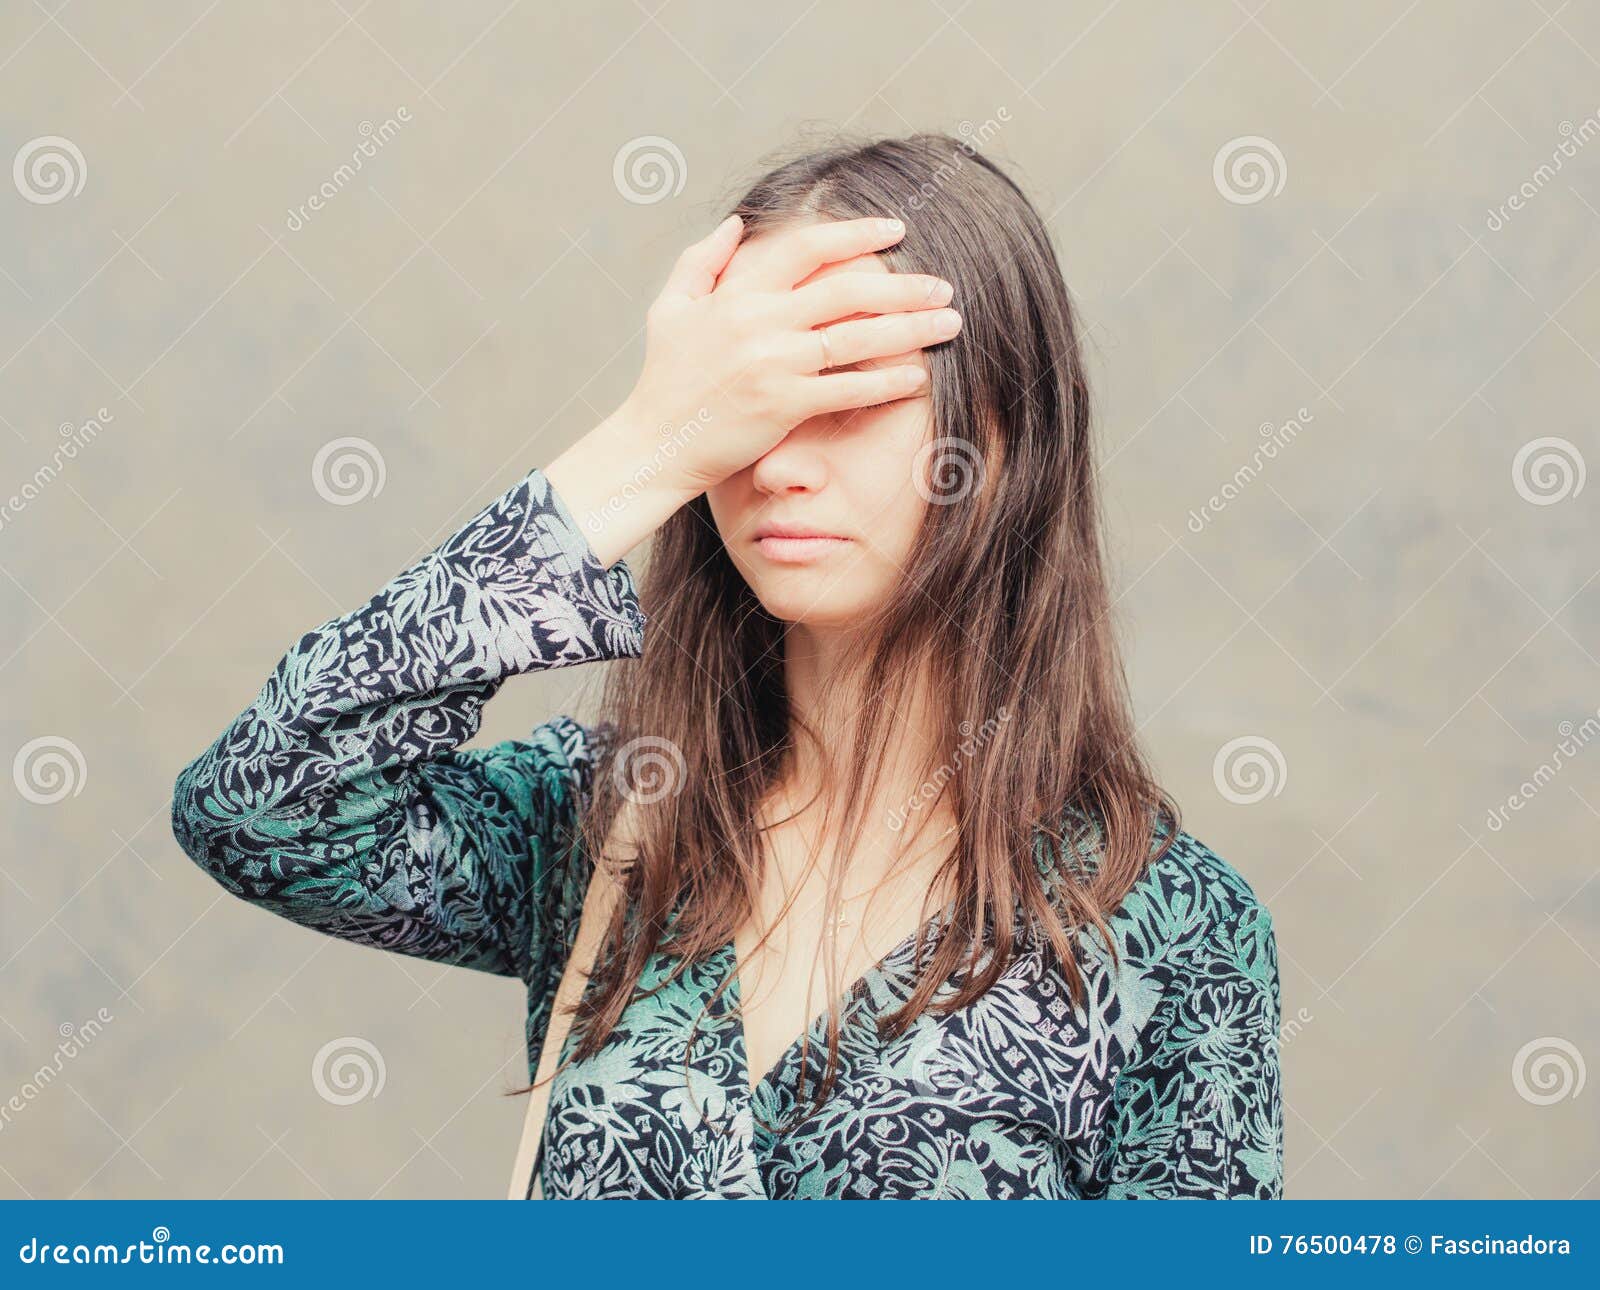 facepalm-girl-gray-wall-background-portrait-young-woman-doing-posing-against-76500478.jpg